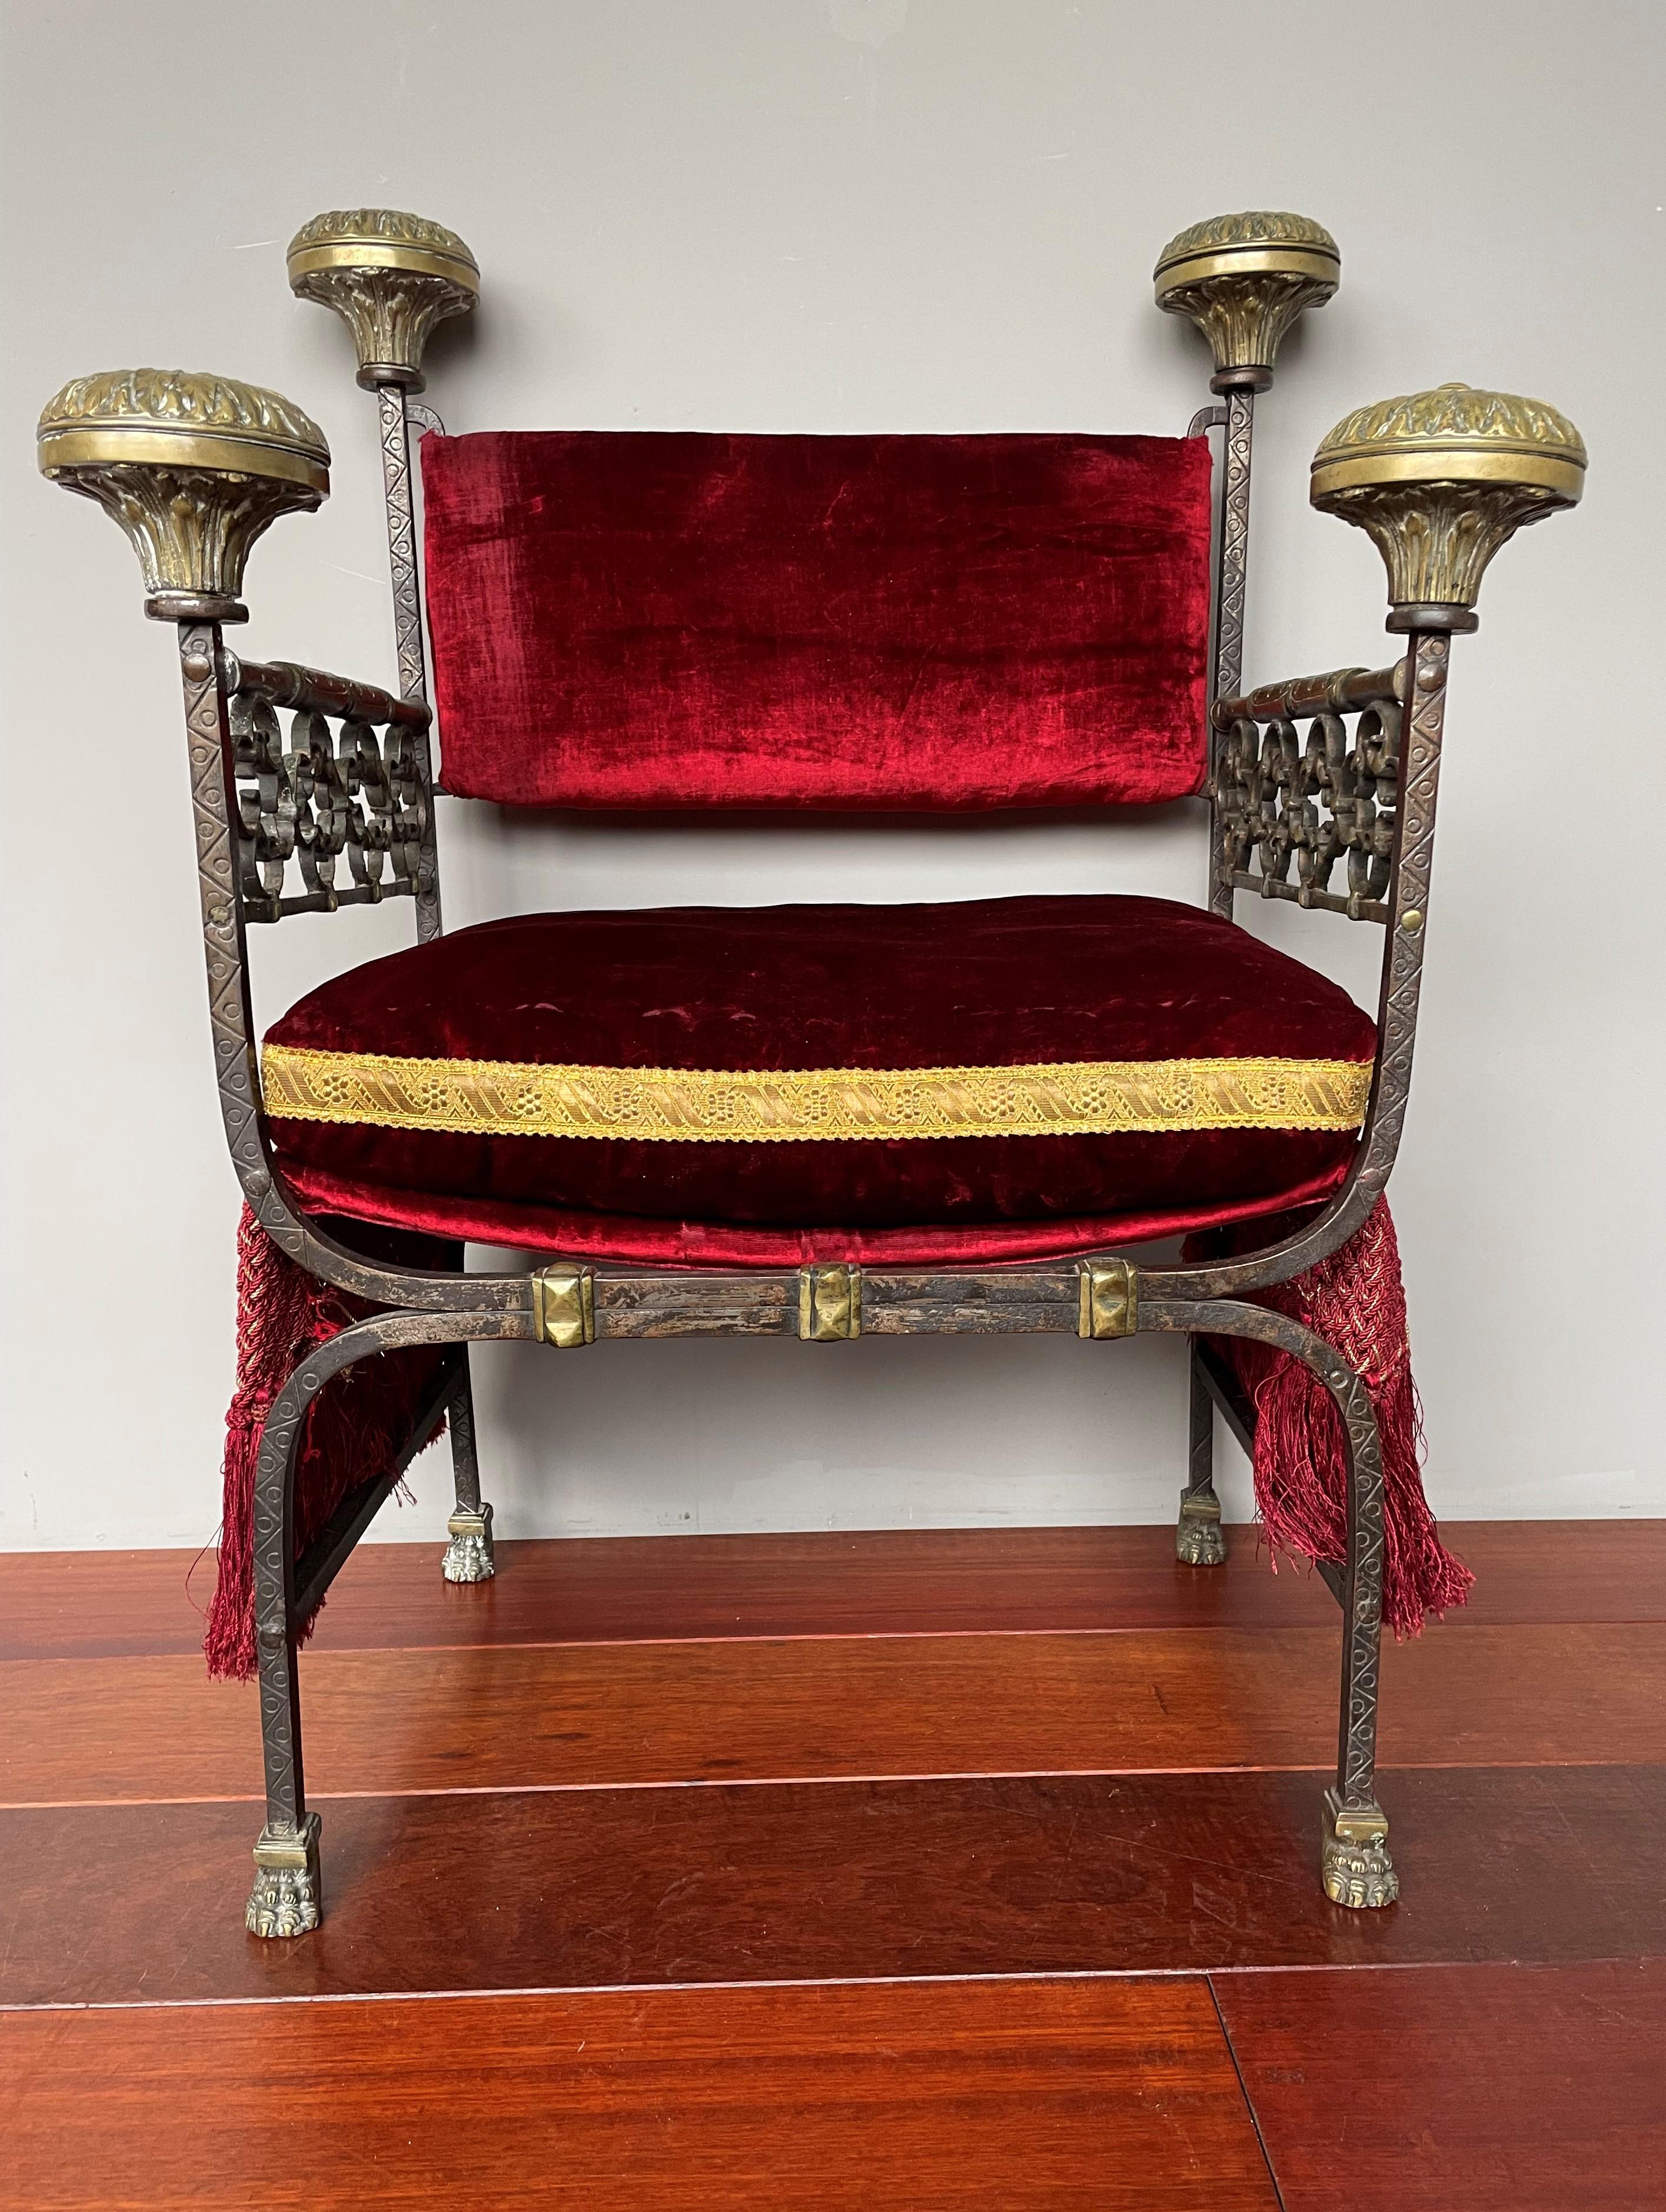 Gothic Revival Antique & Stunning Wrought Iron & Bronze Gothic Castle Chair w. Scarlet Red Seat